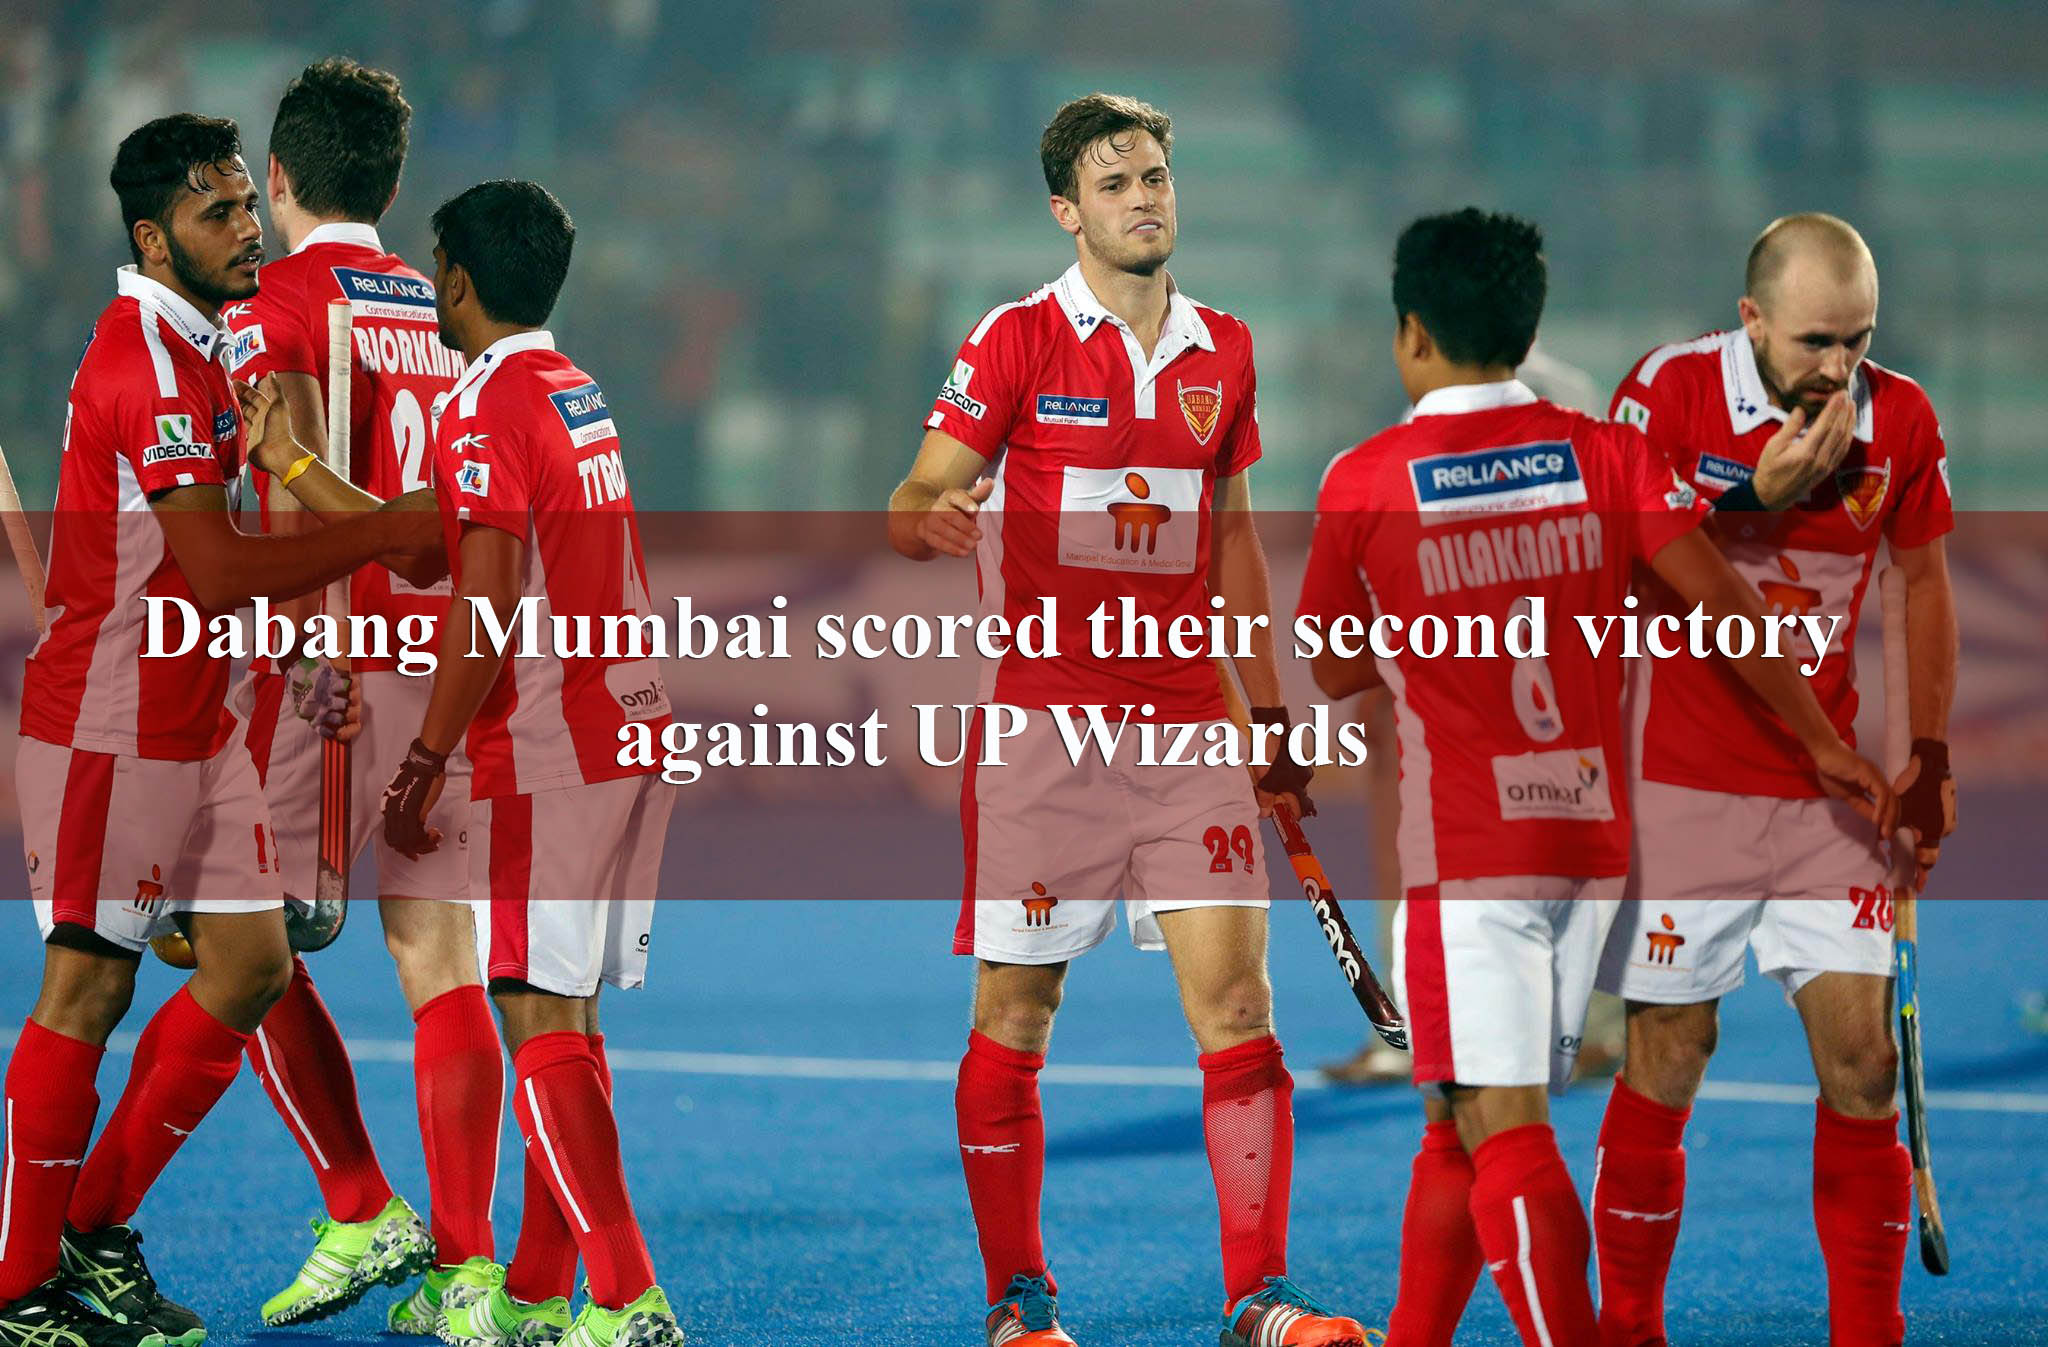 Dabang Mumbai scored their second victory against UP Wizards